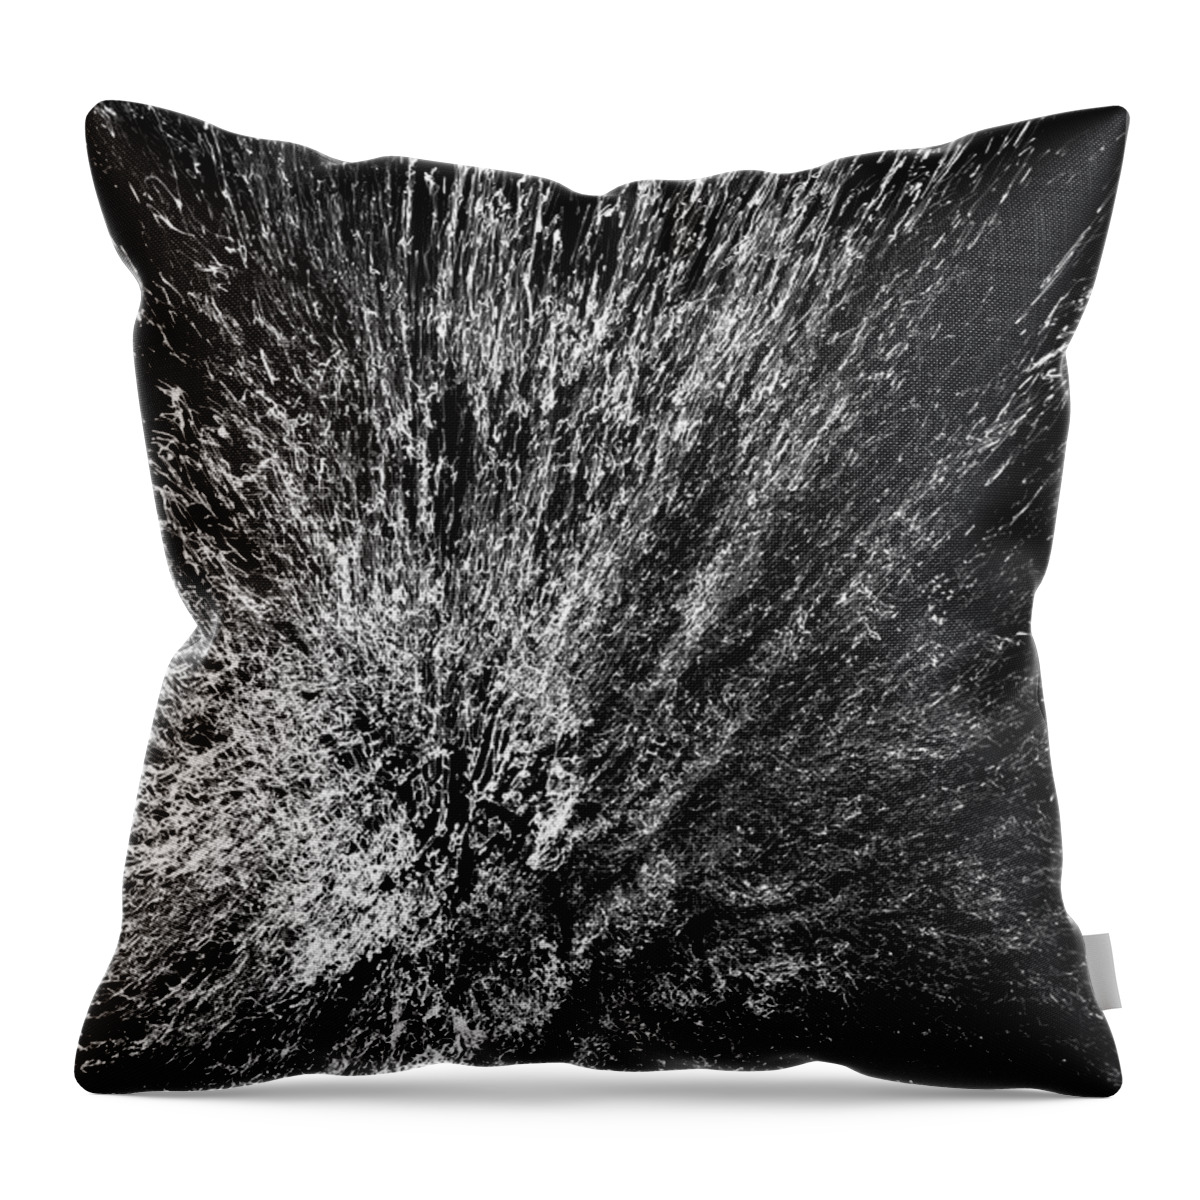 Water Throw Pillow featuring the photograph Splash by Hans Partes